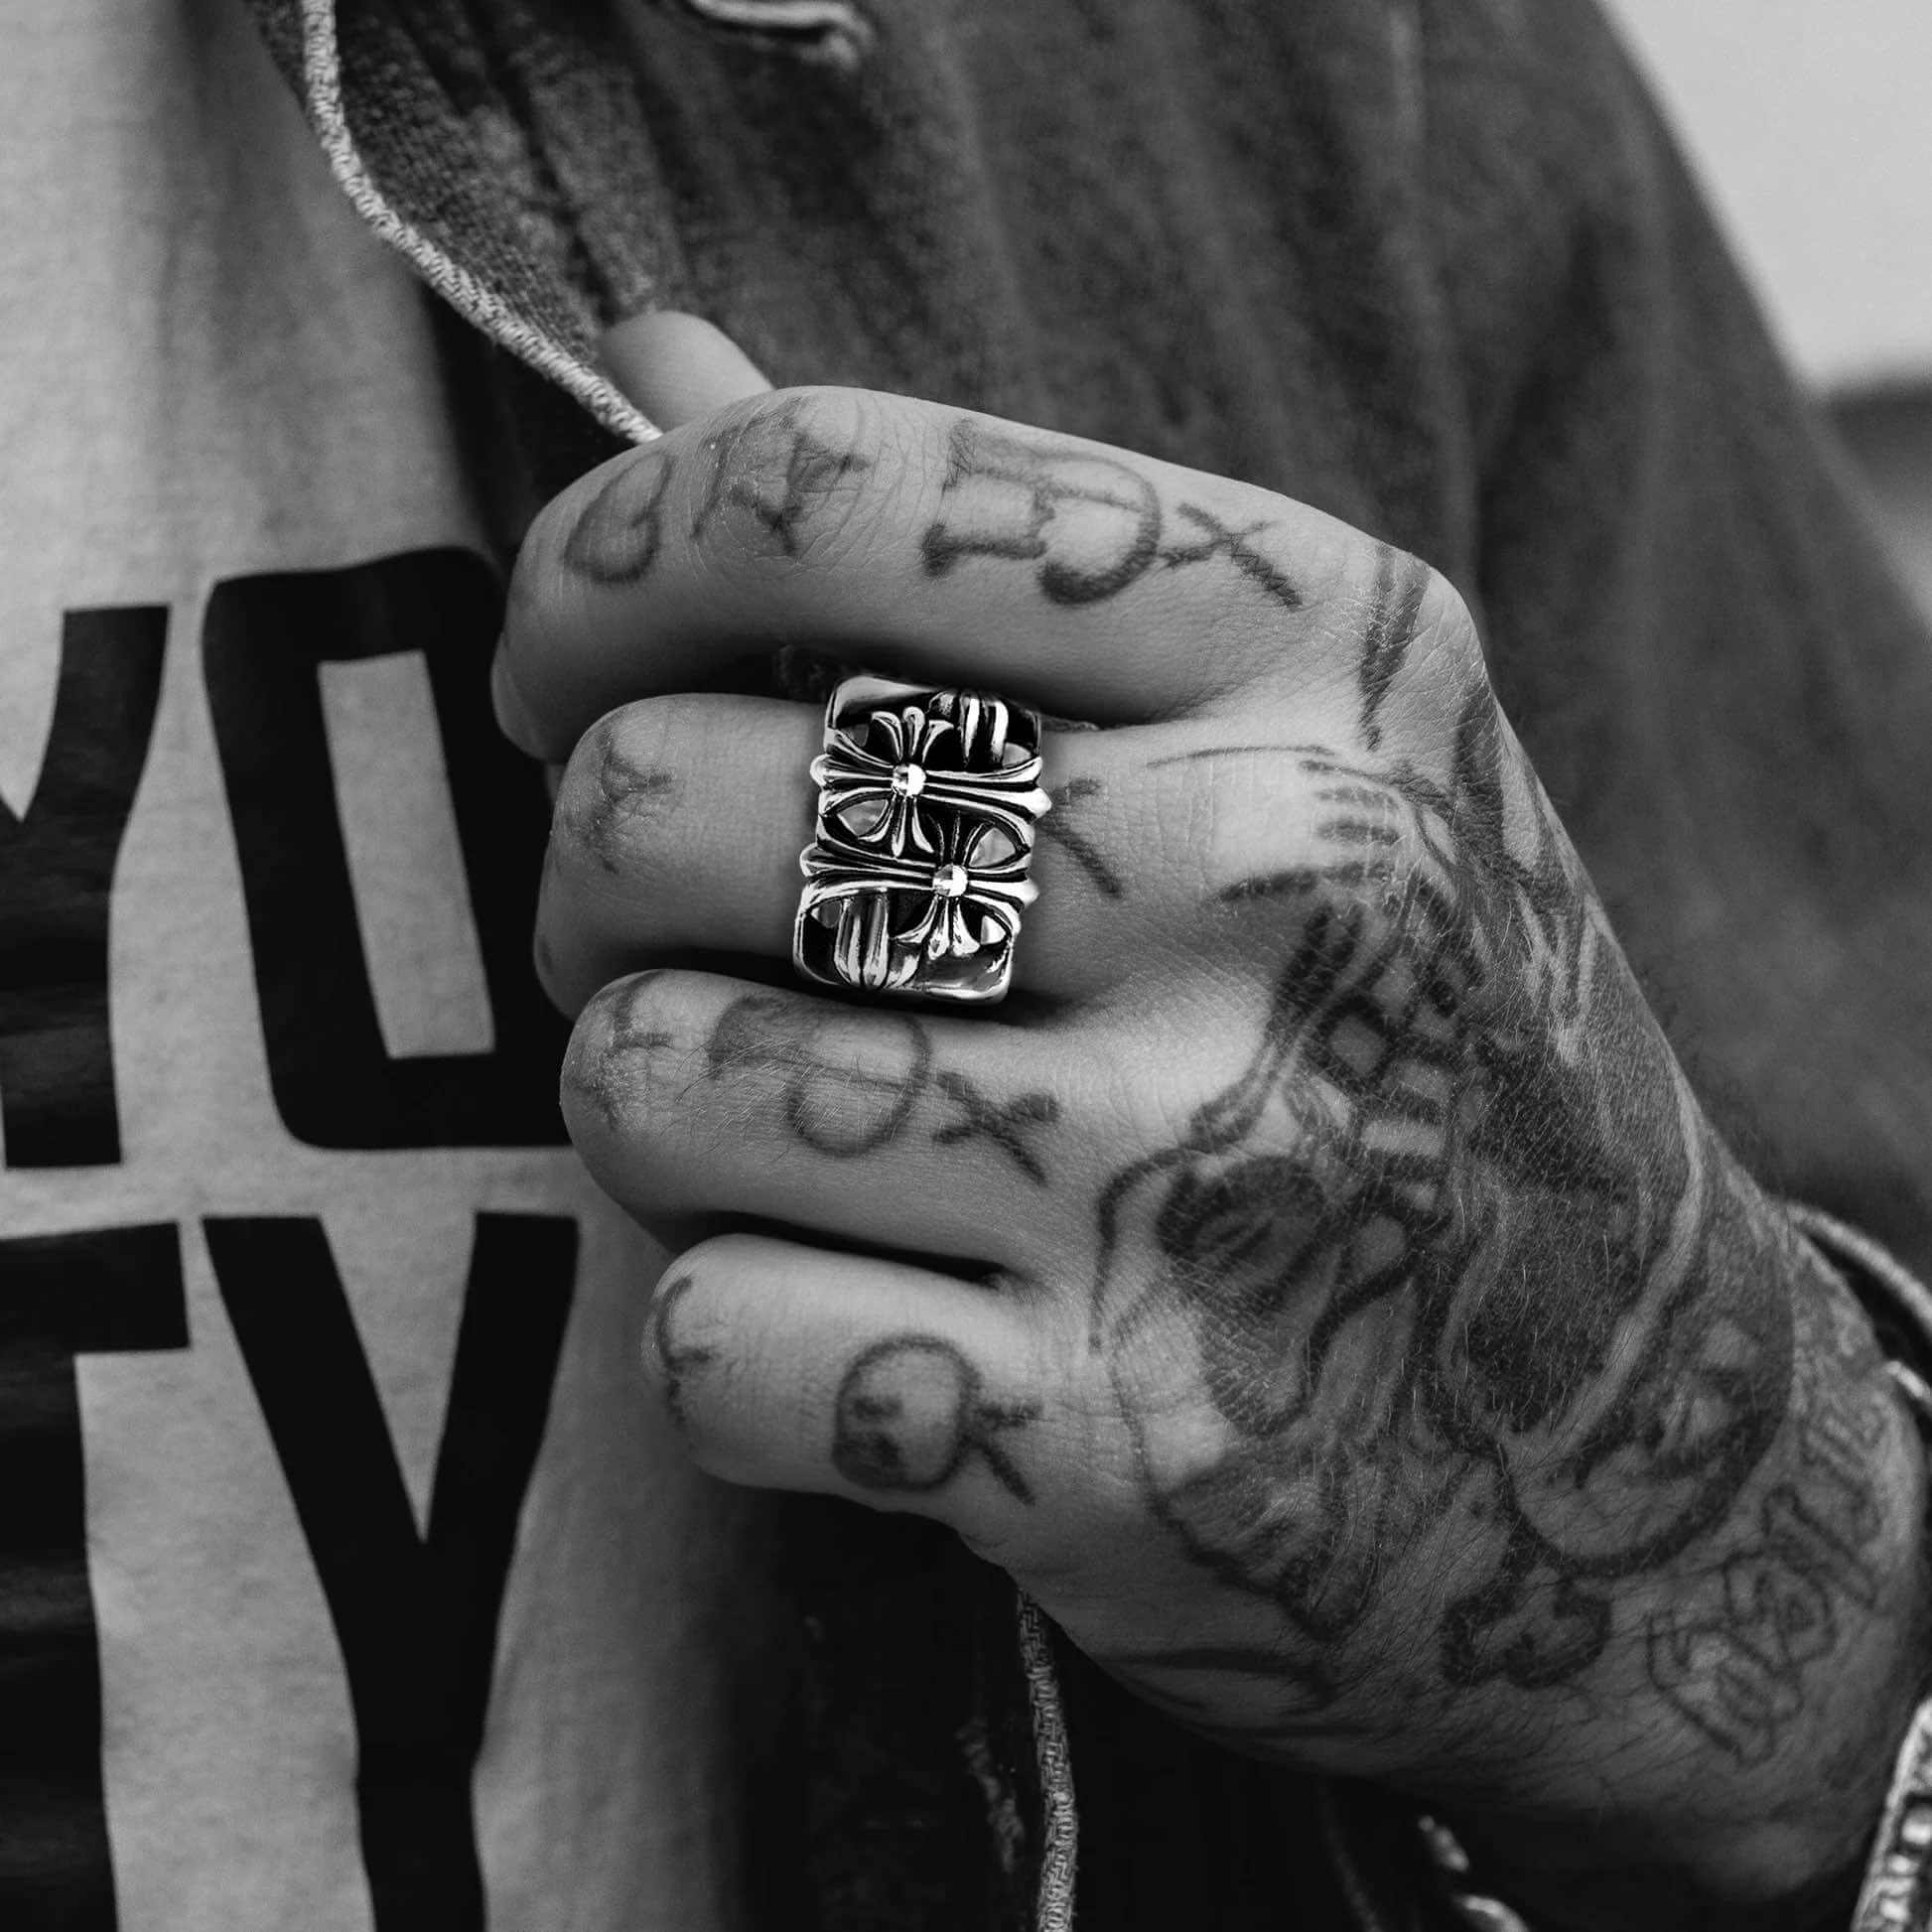 Chrome Hearts: Jewelry and more